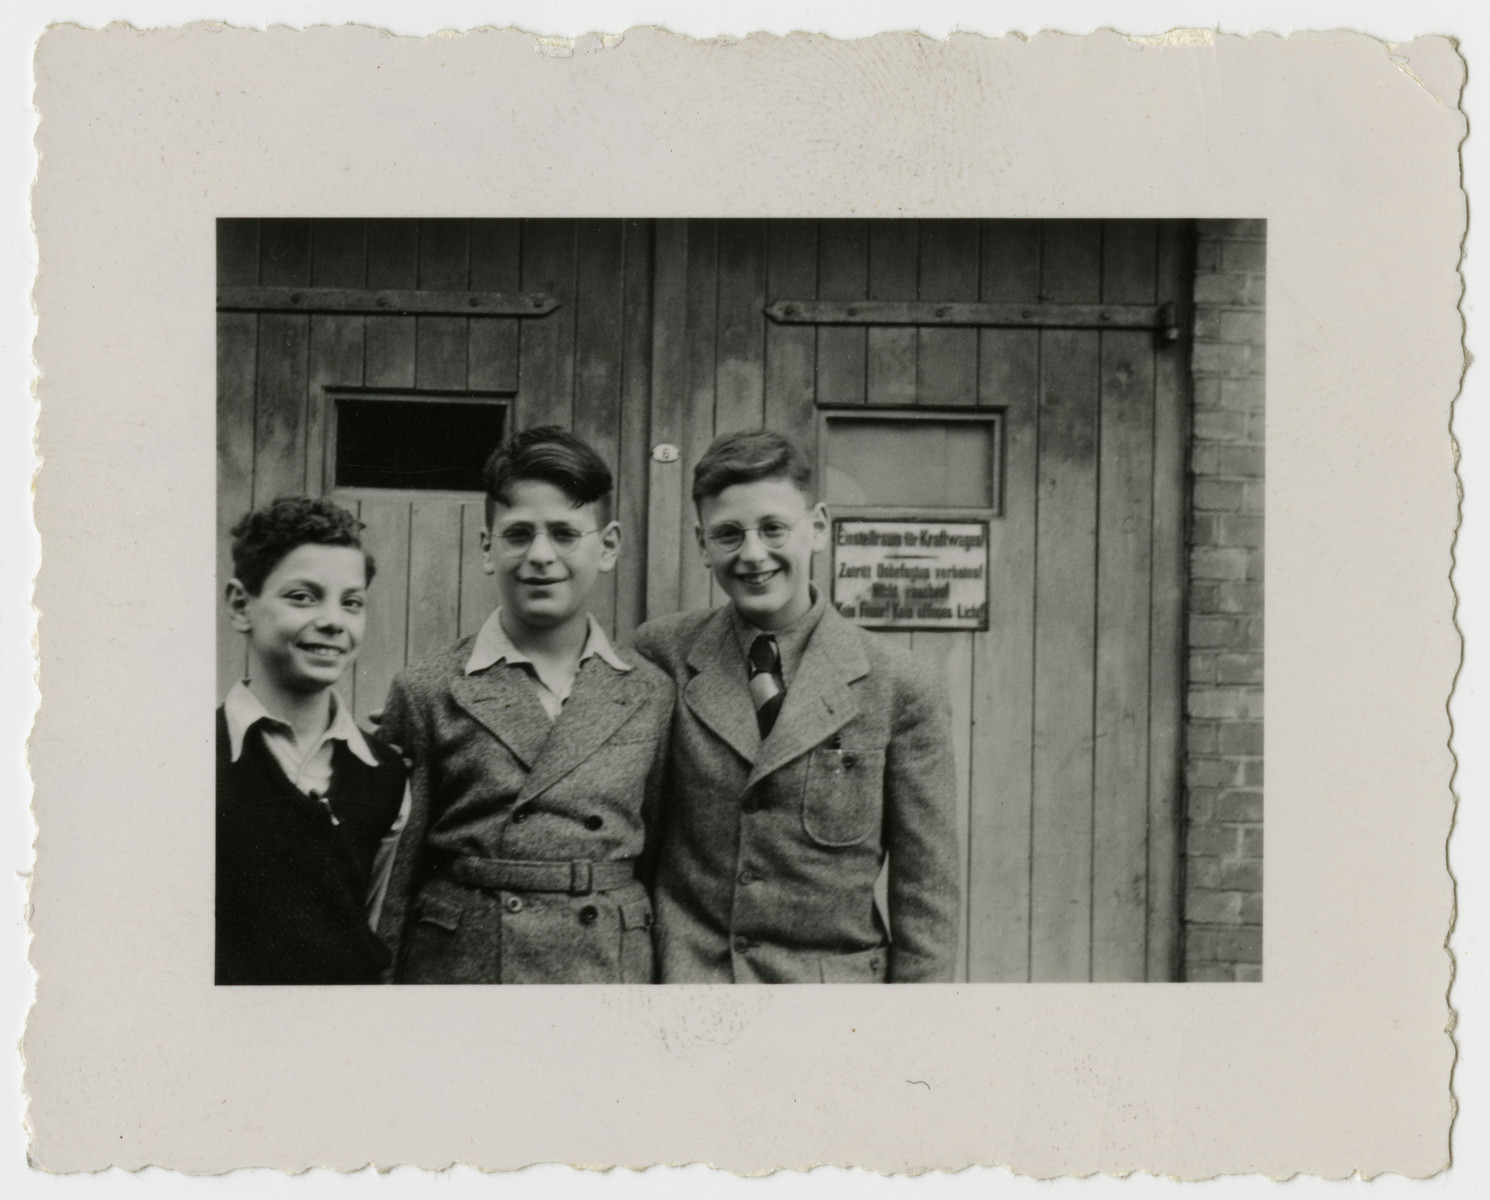 Peter Forchheimer poses with his cousin and brother shortly before emigrating from Germany.

From left to right are Robert, Franz and Peter Forchheimer.